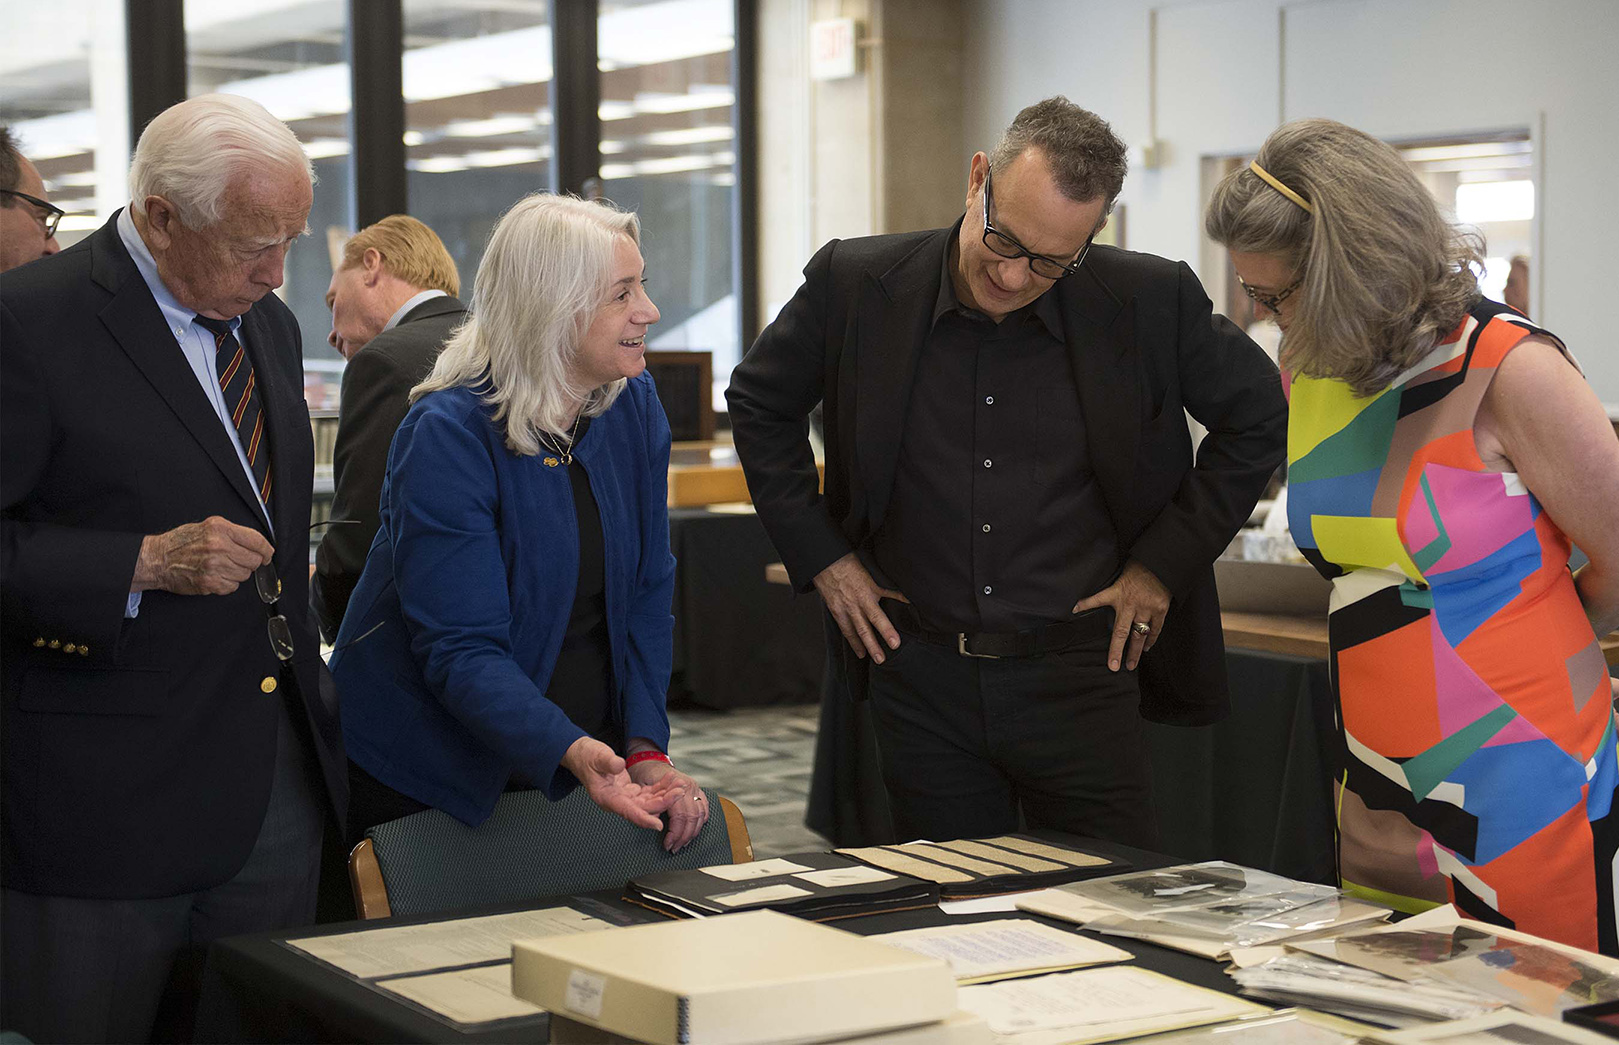 Dawne Dewey, Head of Special Collections & Archives, second from left, shares items from the Wright Brothers Collection with historian David McCullough (left), Tom Hanks, and Amanda Wright Lane, great-grandniece of the Wright Brothers. (Photo by university photographer Will Jones)